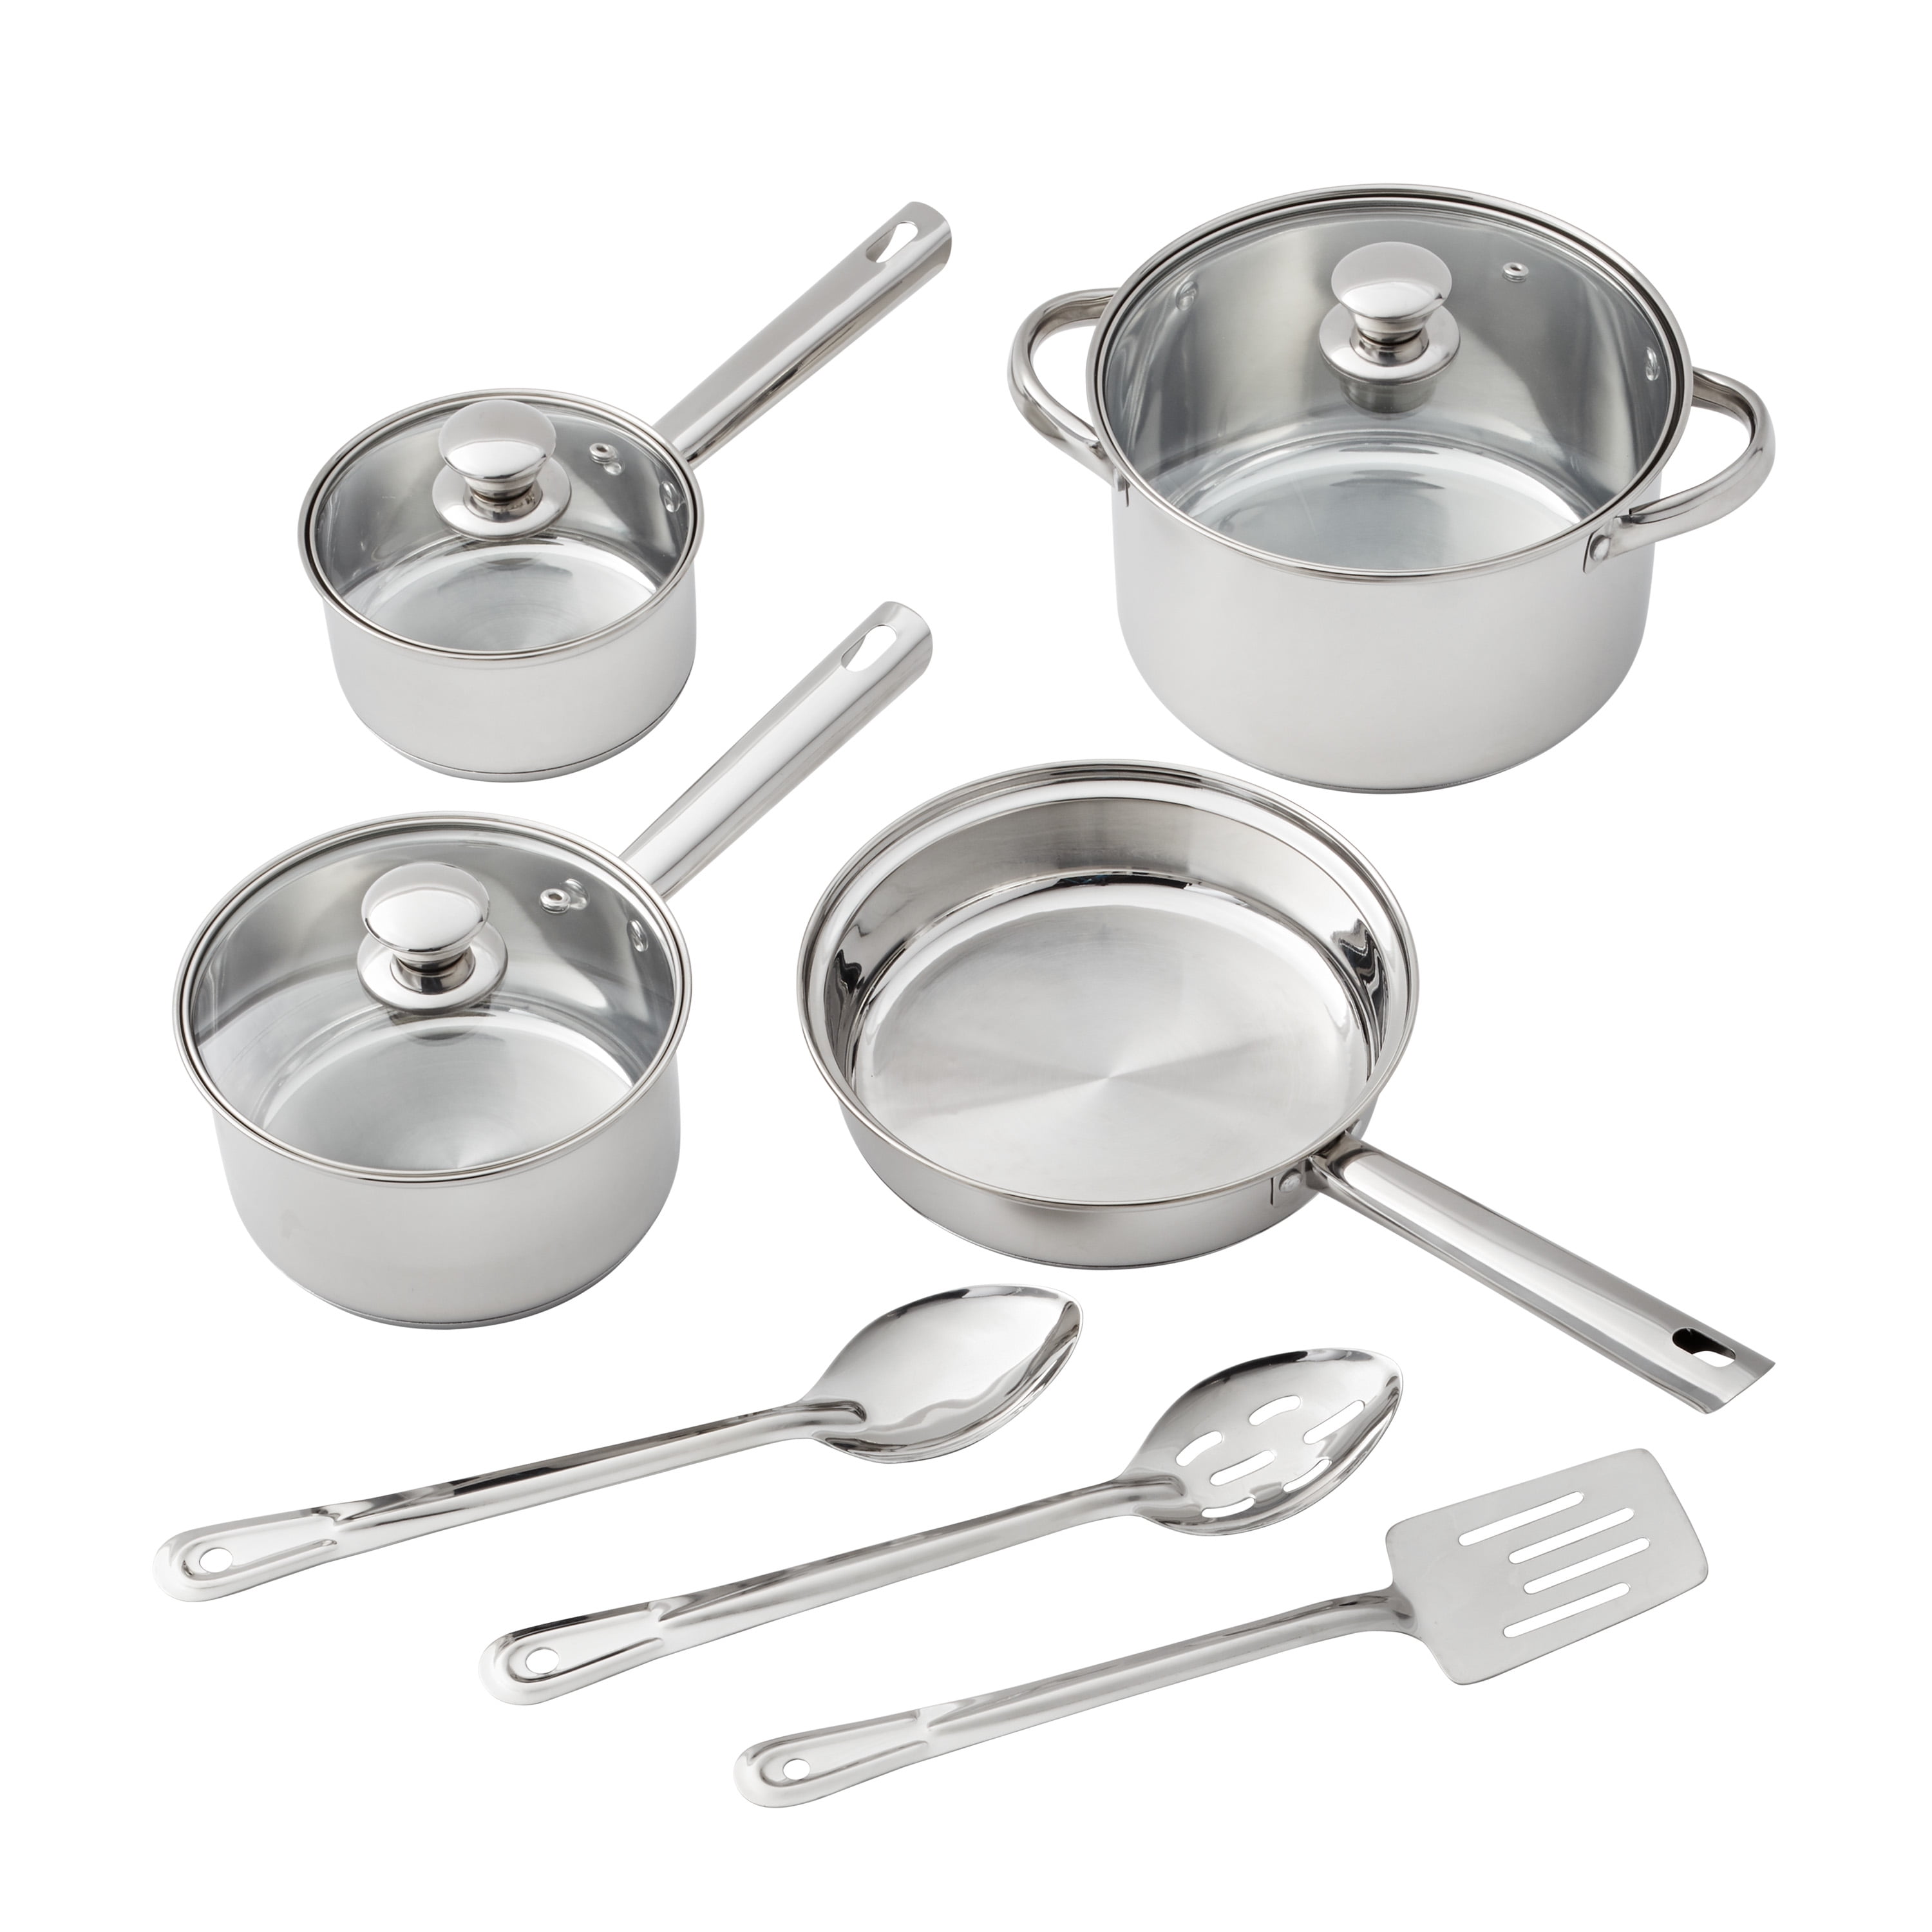 Cookware Set Stainless Steel Kitchen Tools Pots Pans Bowls 10/18/52 Pieces NEW